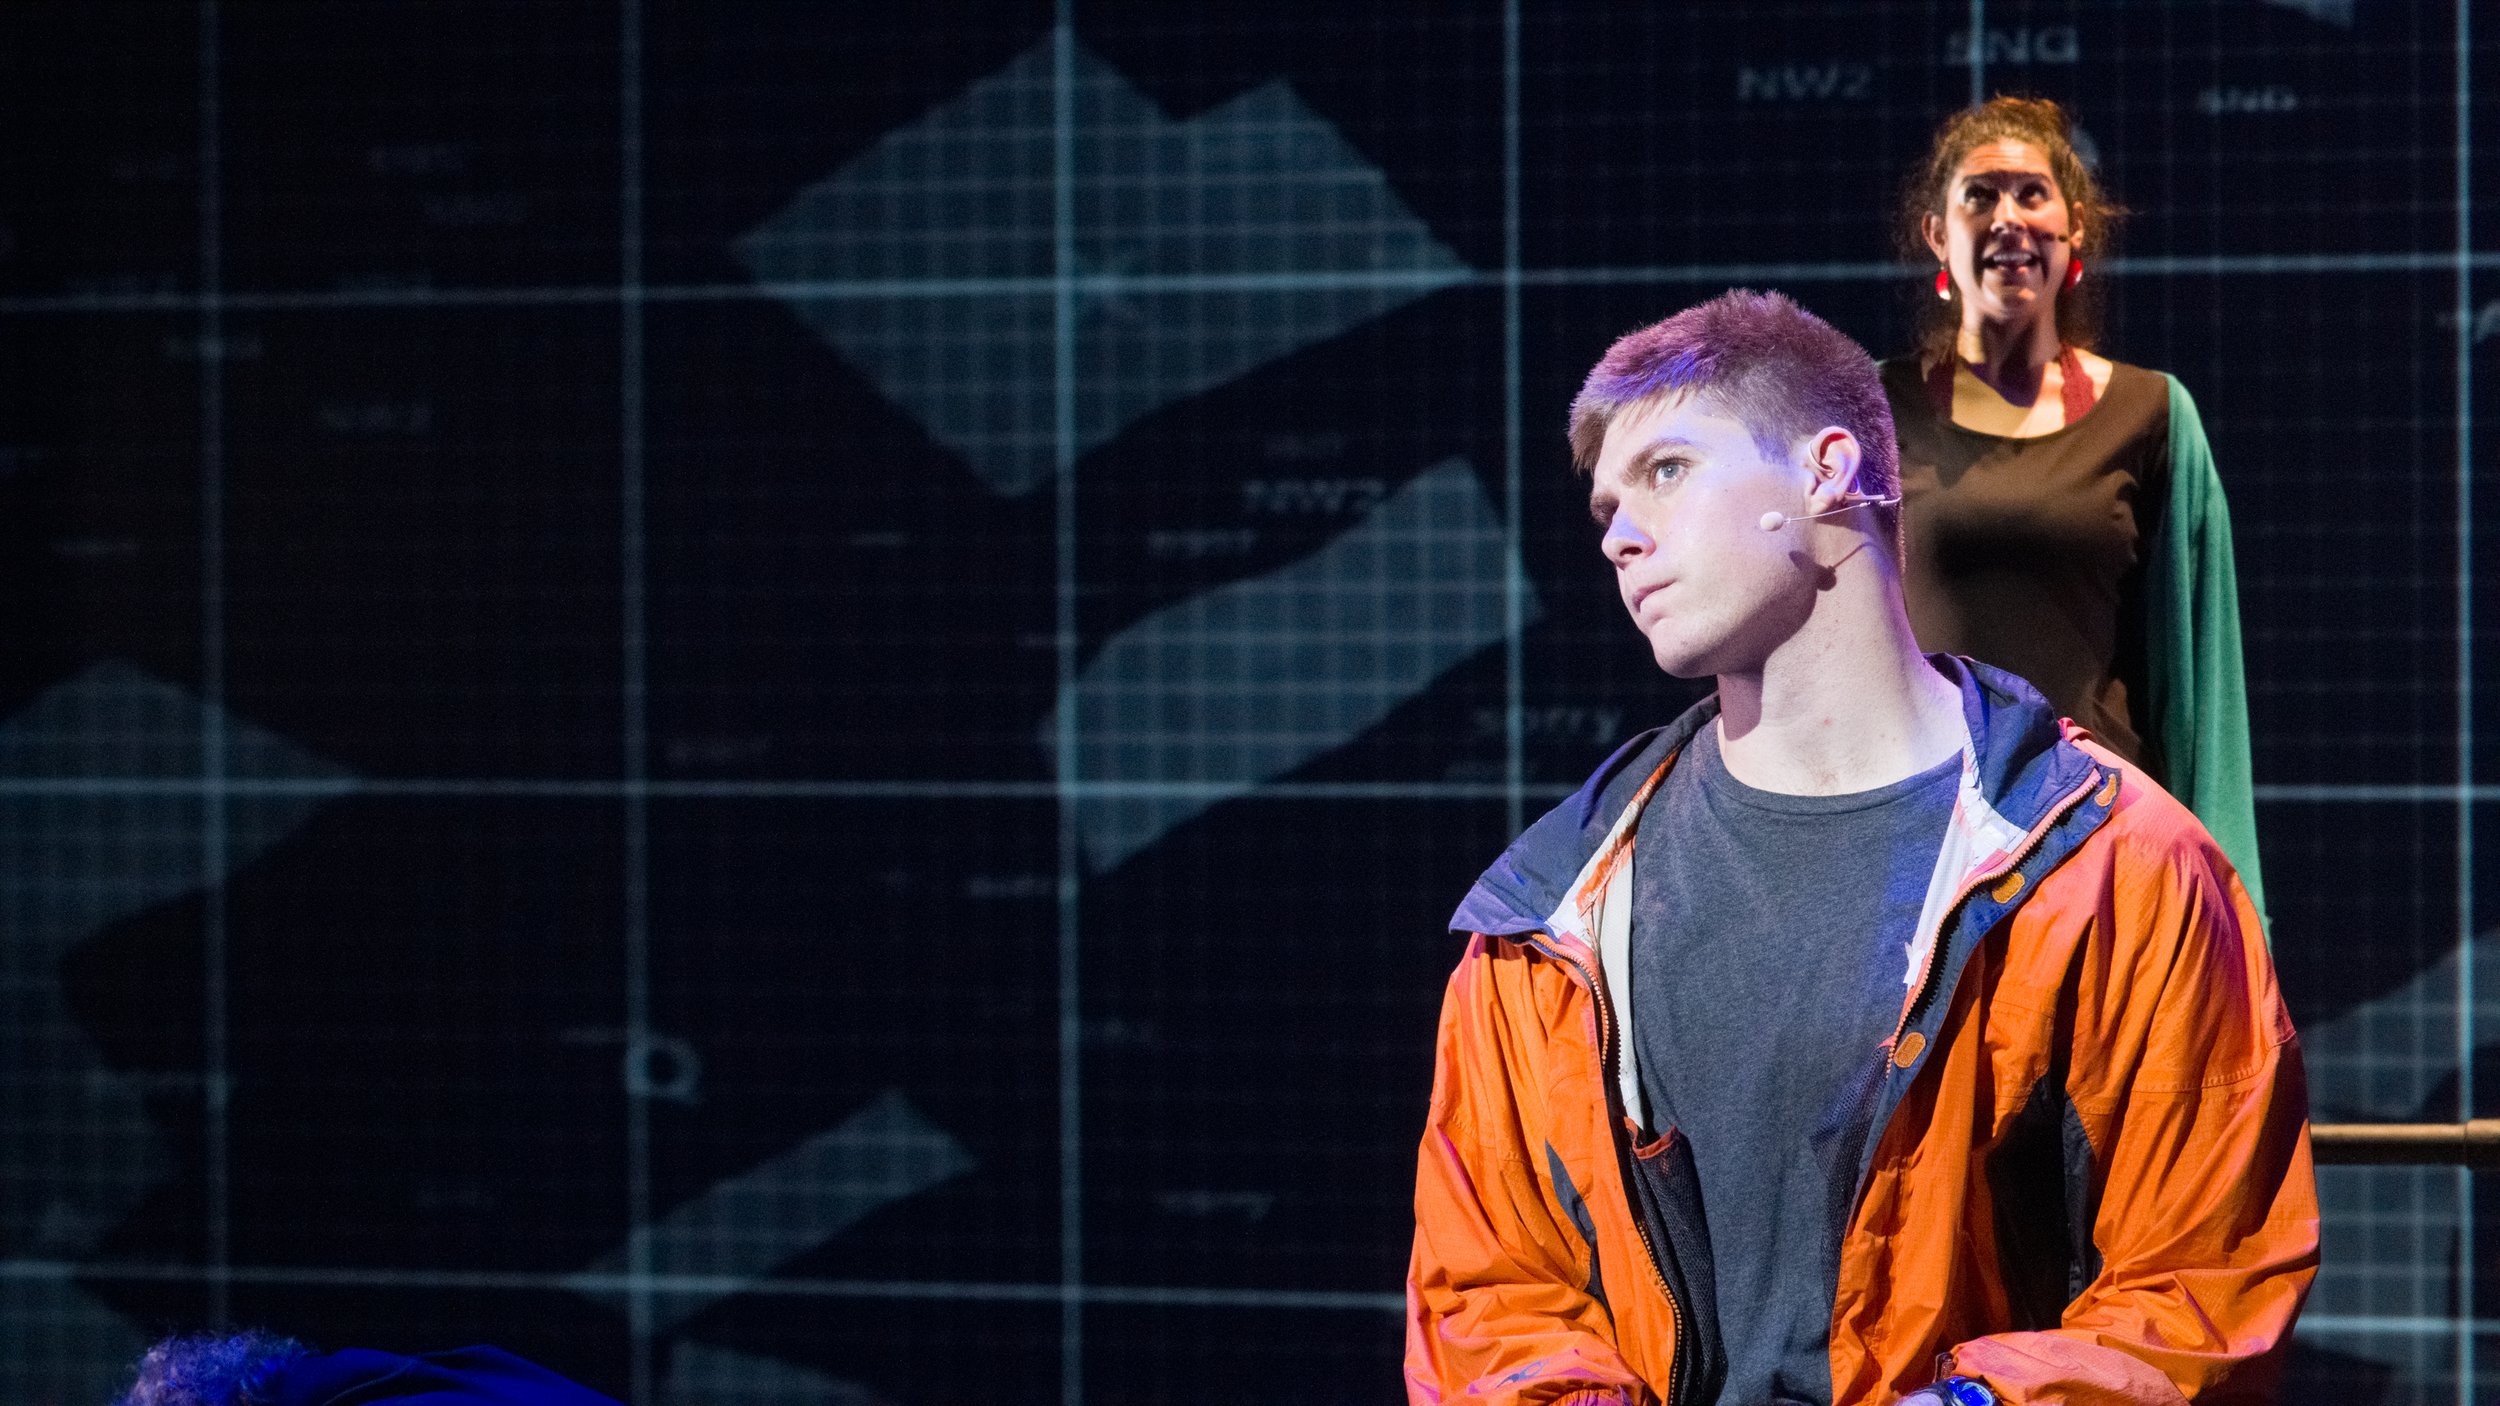  Justin Valine (center) and Kiana Spath (Right) during last dress rehearsal before the first showing of "The Curious Incident of The Dog in The Night-Time" on Thursday, October 7th at Santa Monica College, Santa Monica, Calif. 